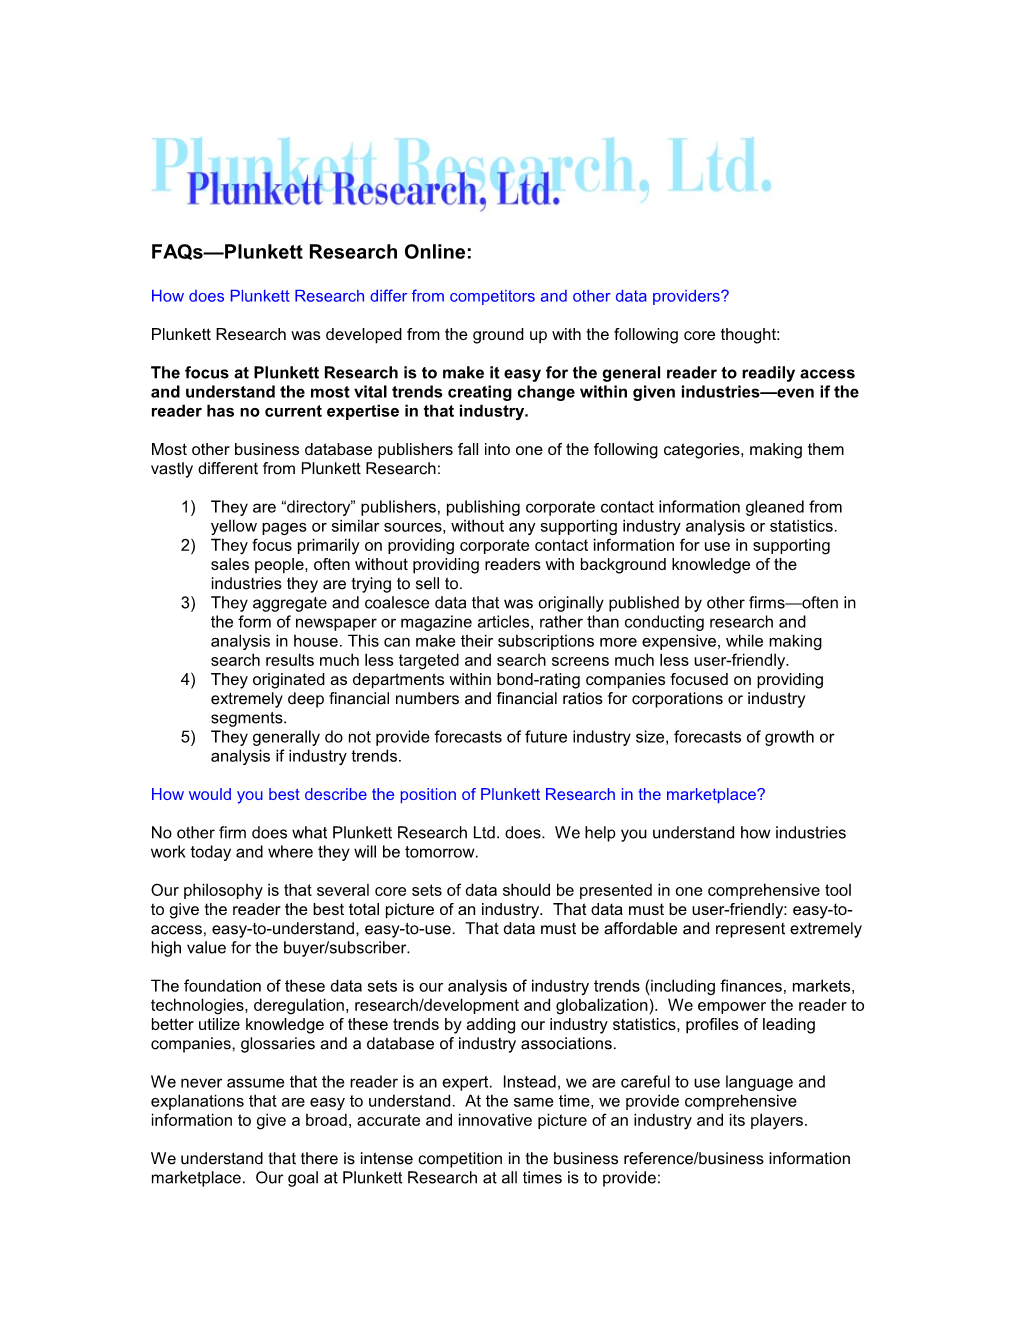 Plunkett Research Online Comparisons Plunkett Research Selling Points